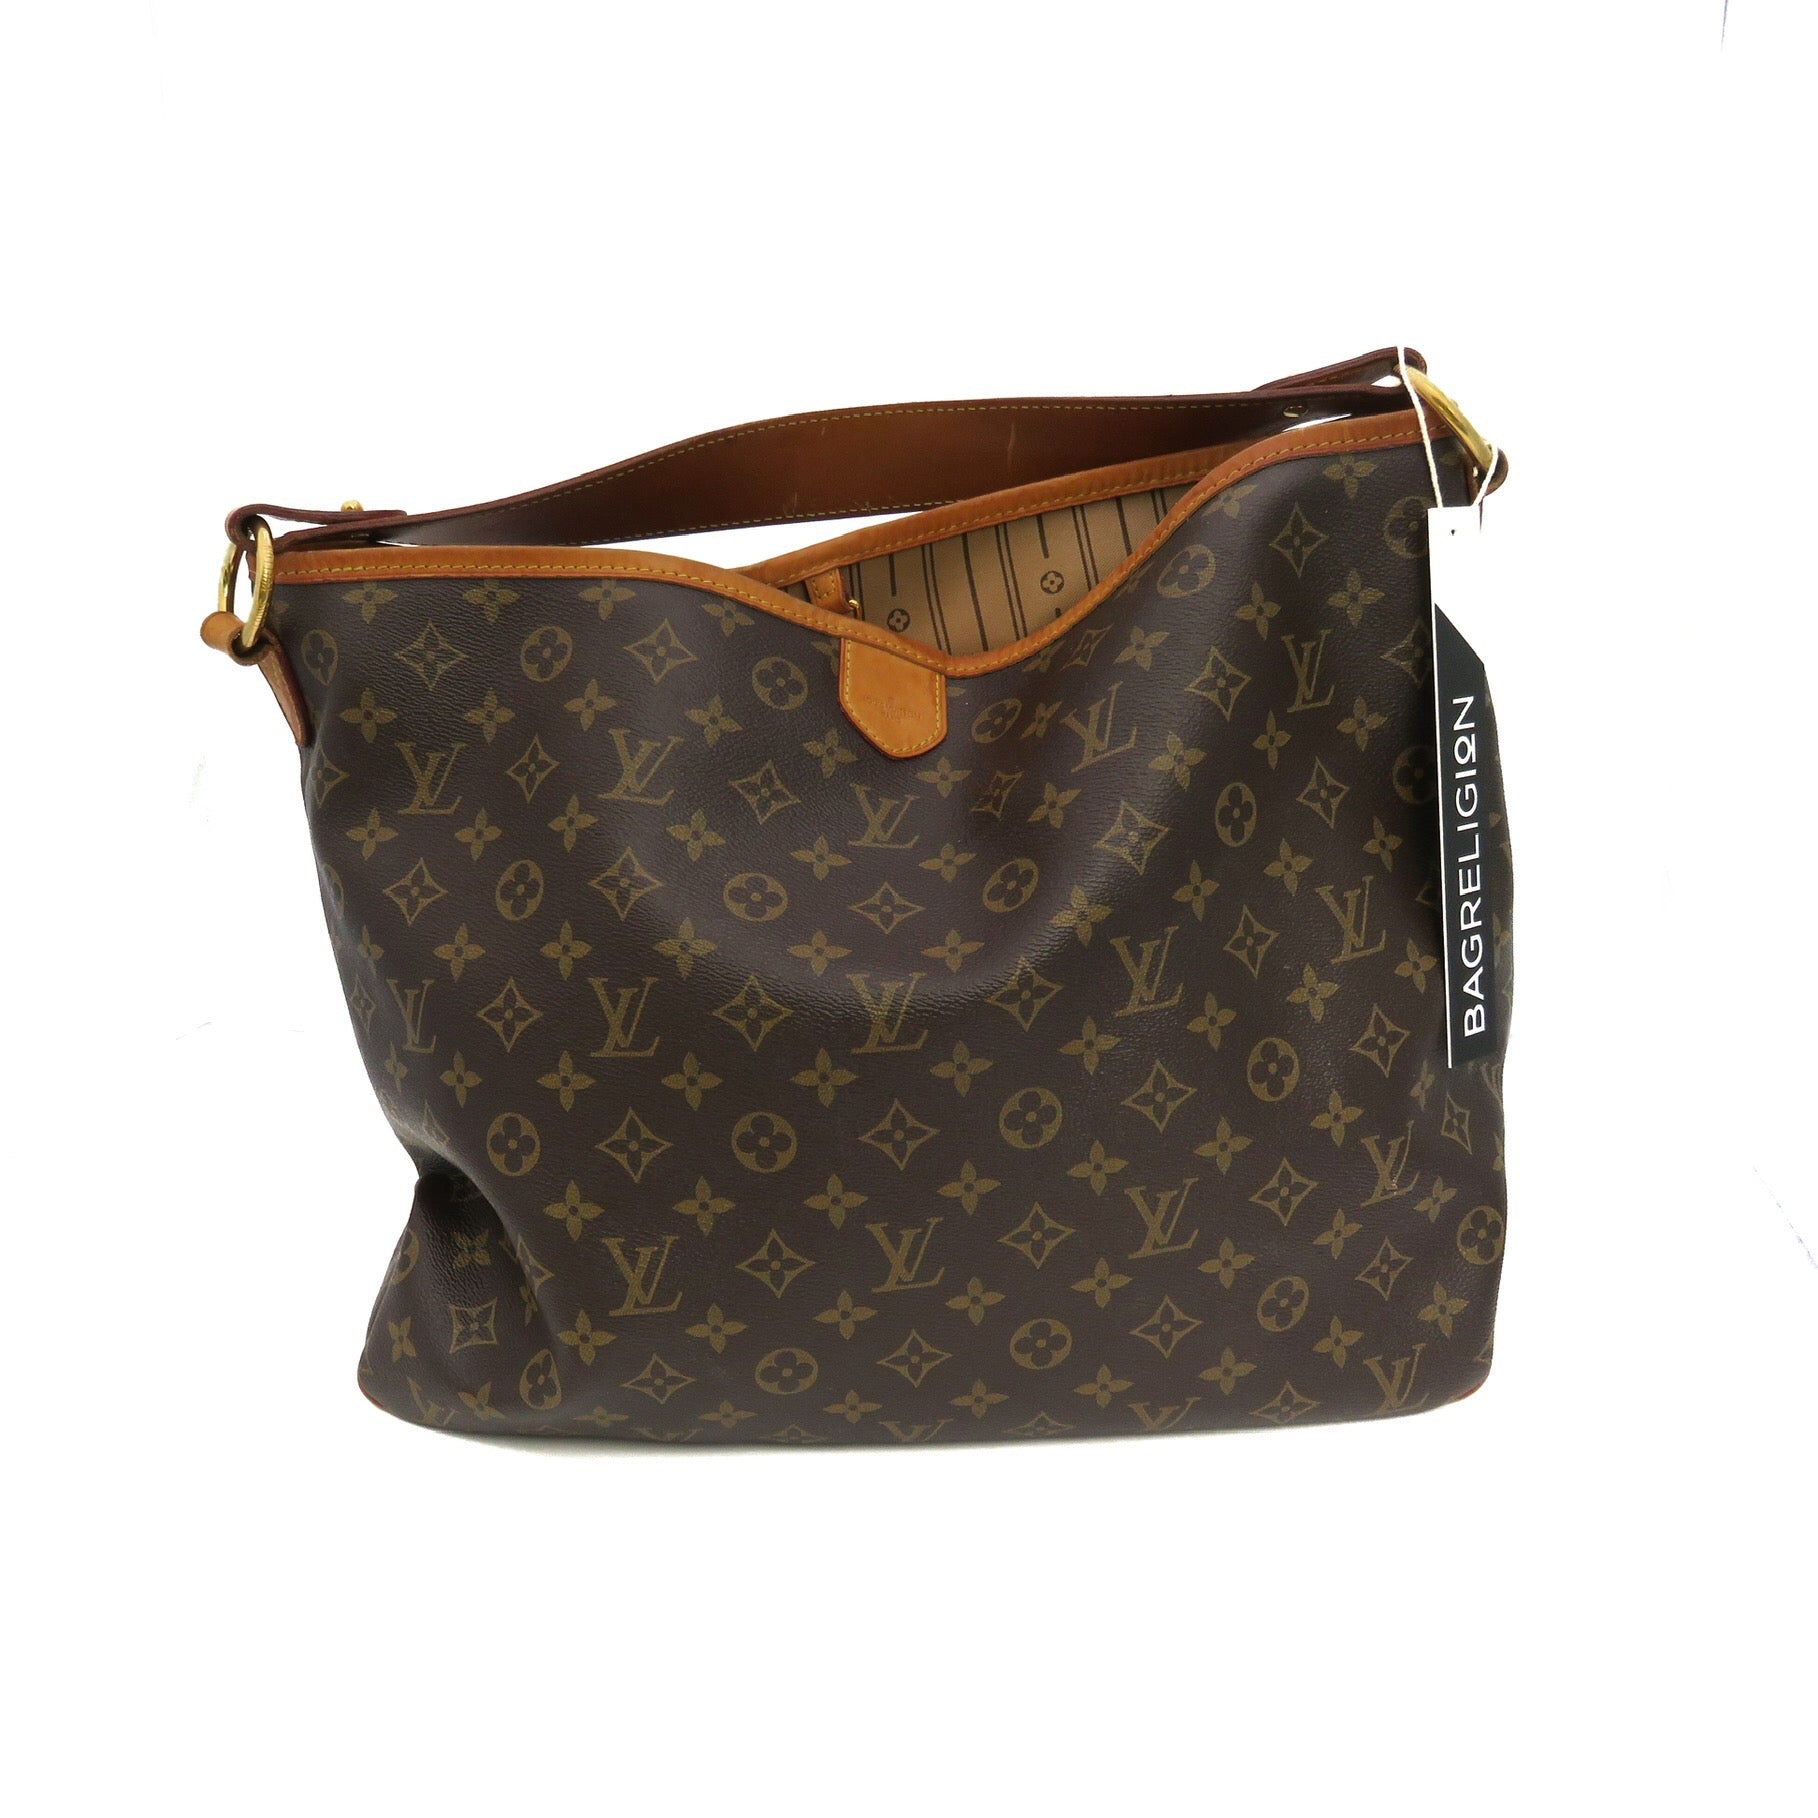 Buy Pre-owned & Brand new Luxury Louis Vuitton Monogram Canvas Delightful  PM Bag Online